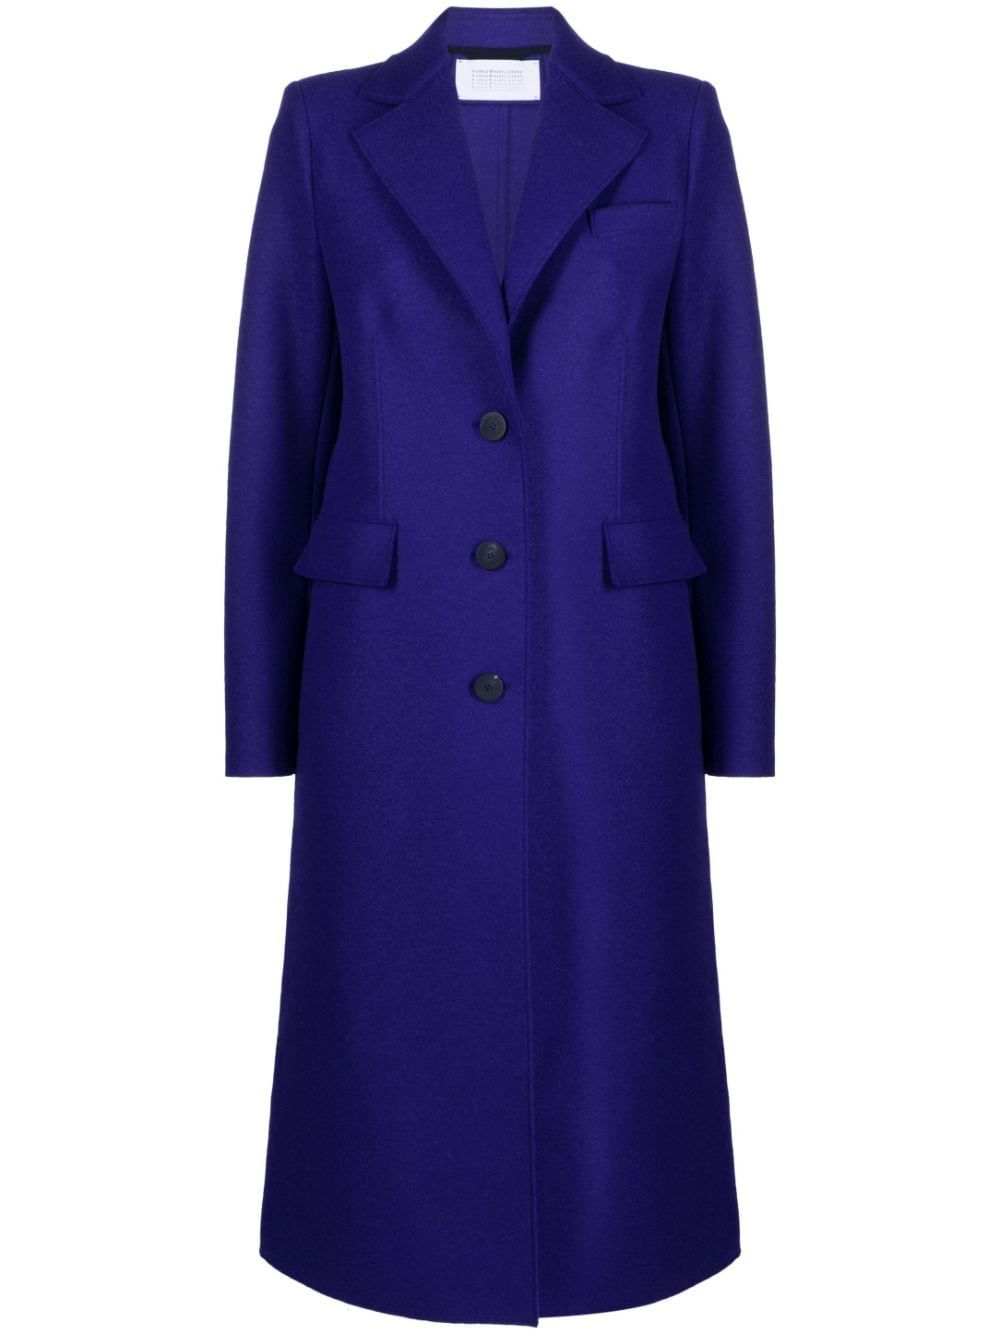 Shop Harris Wharf London Women Single Breasted Coat With Shoulder Pads Pressed Wool